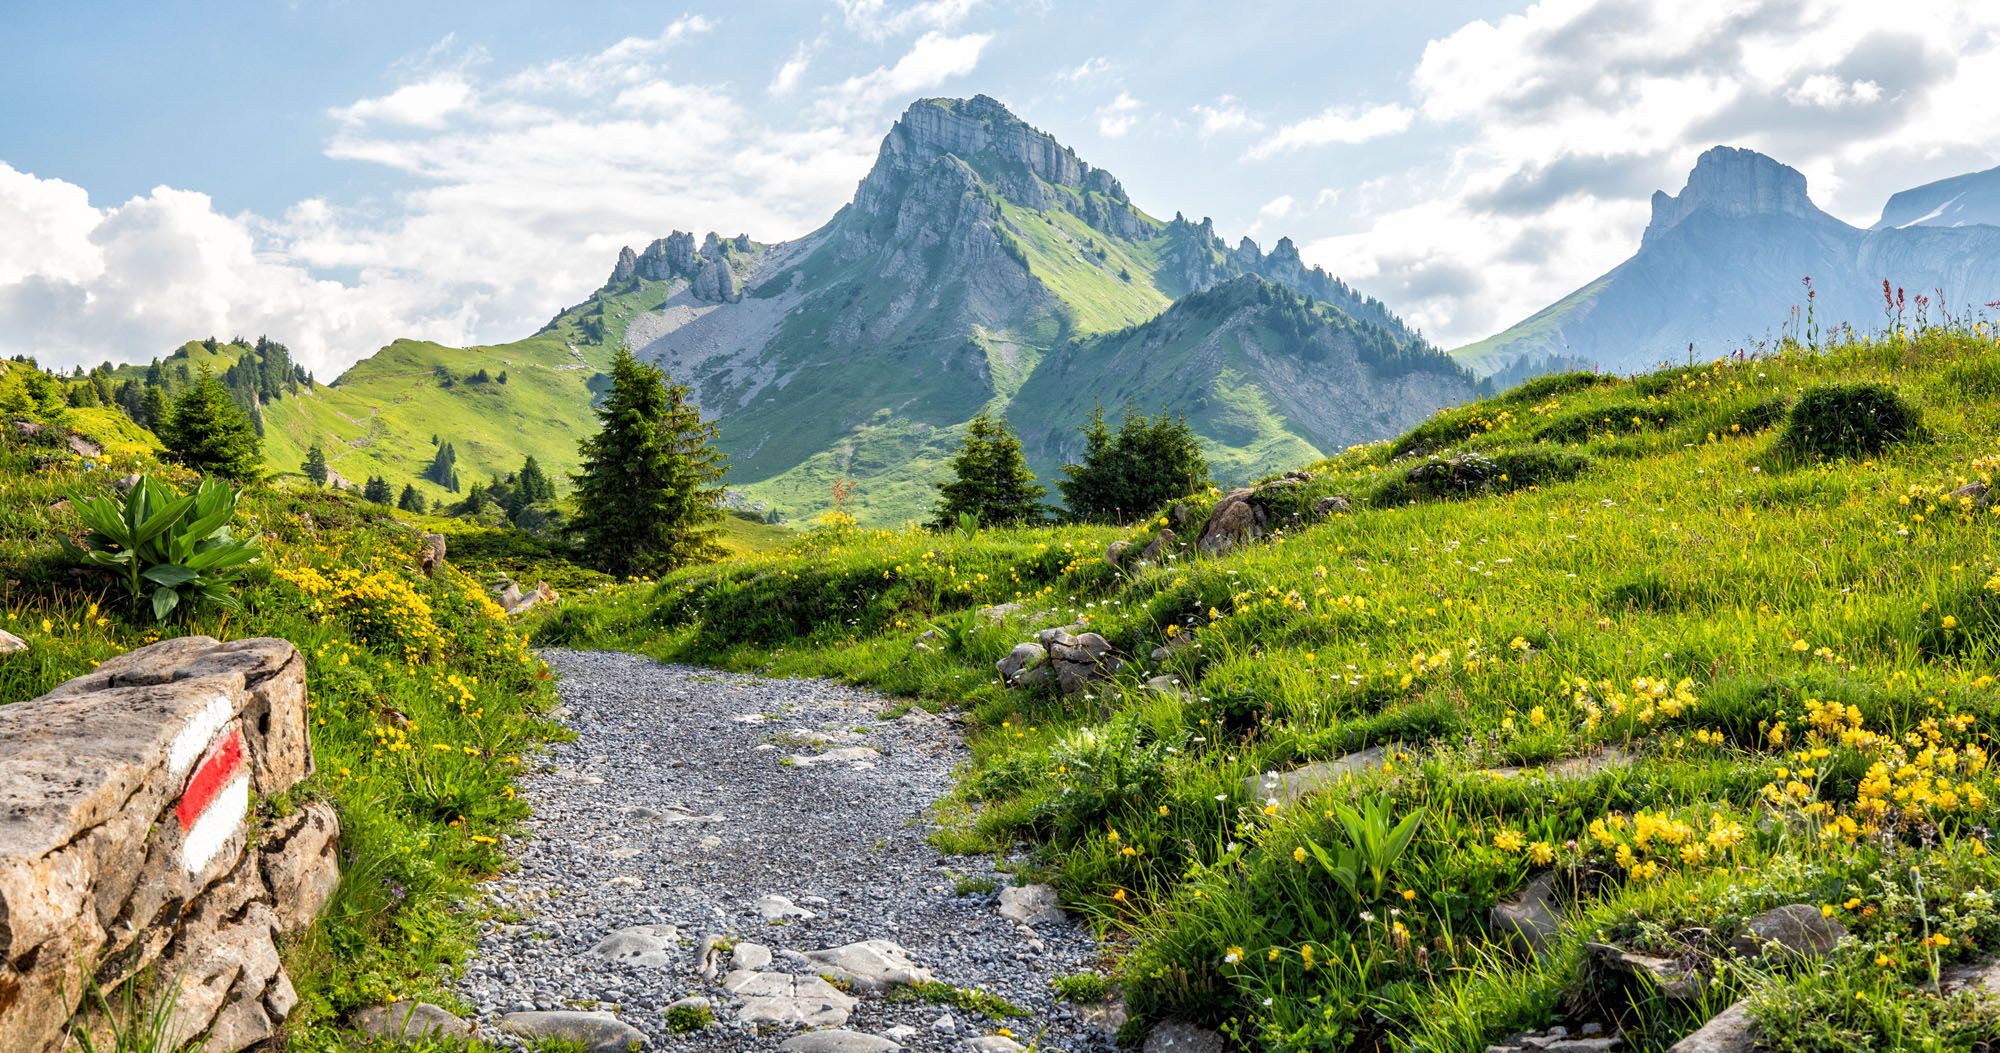 Featured image for “15 Great Hikes to Do in the Bernese Oberland, Switzerland”